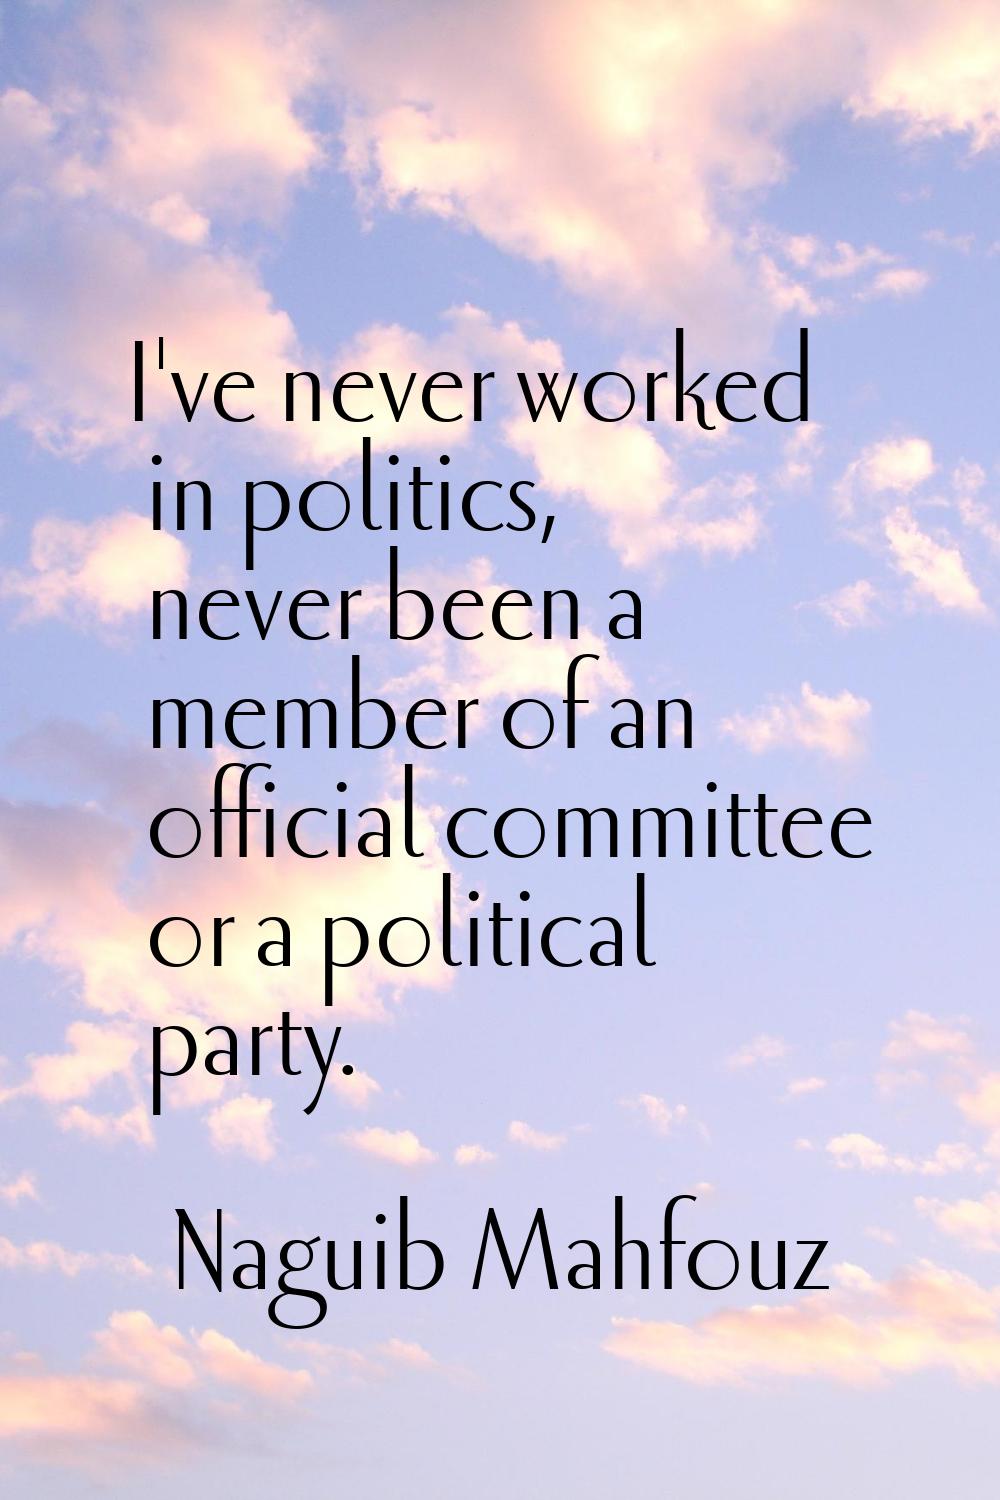 I've never worked in politics, never been a member of an official committee or a political party.